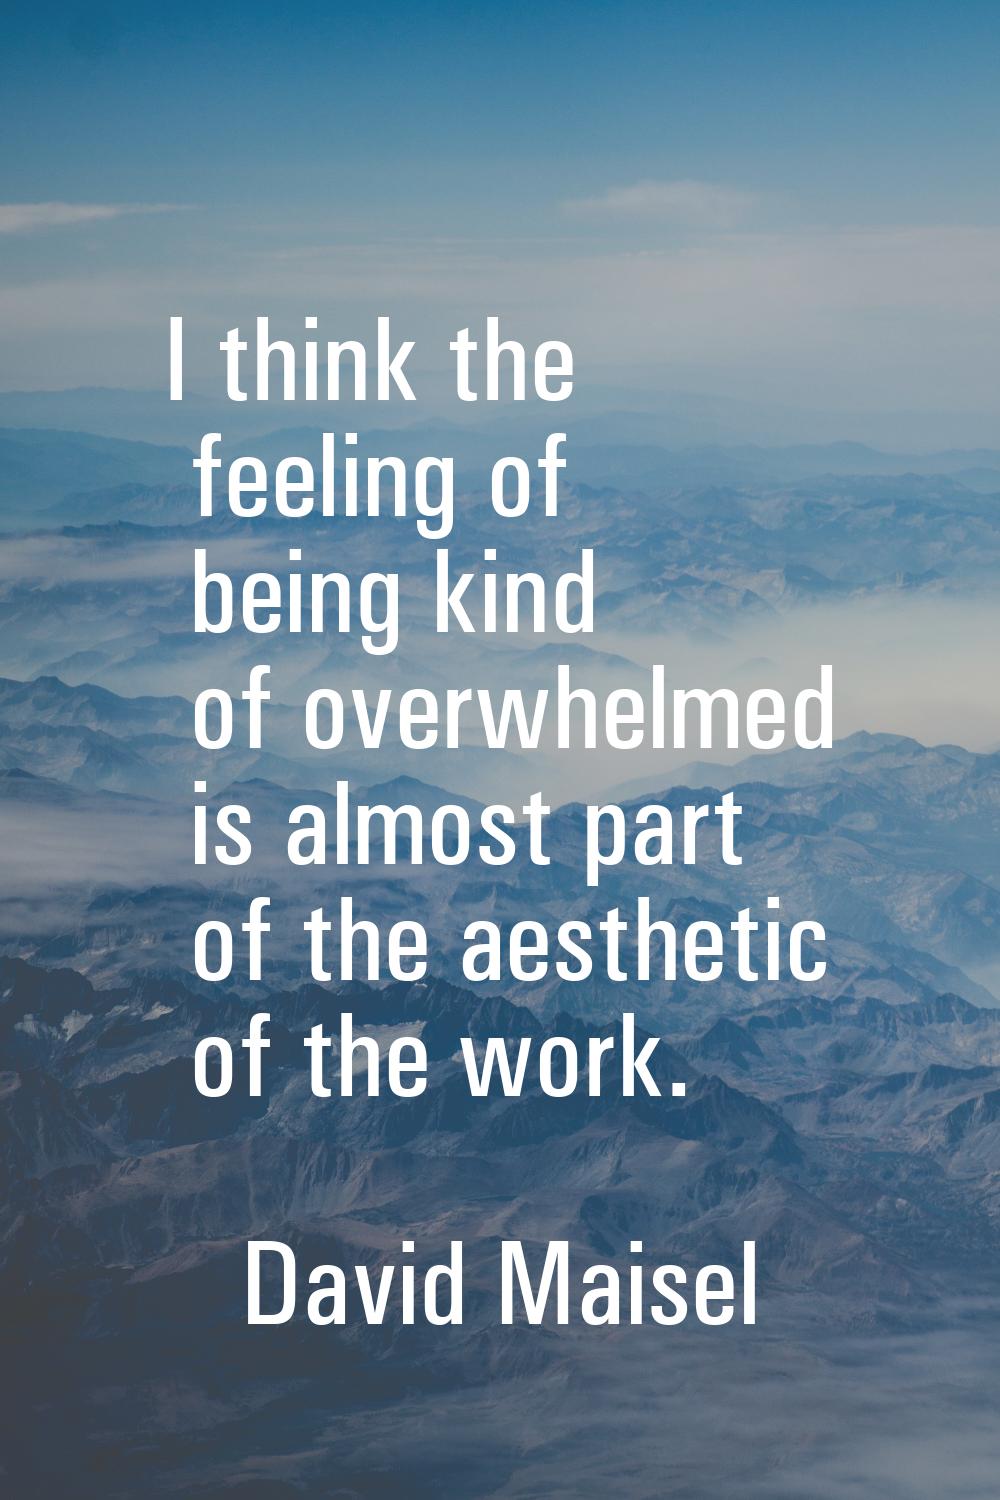 I think the feeling of being kind of overwhelmed is almost part of the aesthetic of the work.